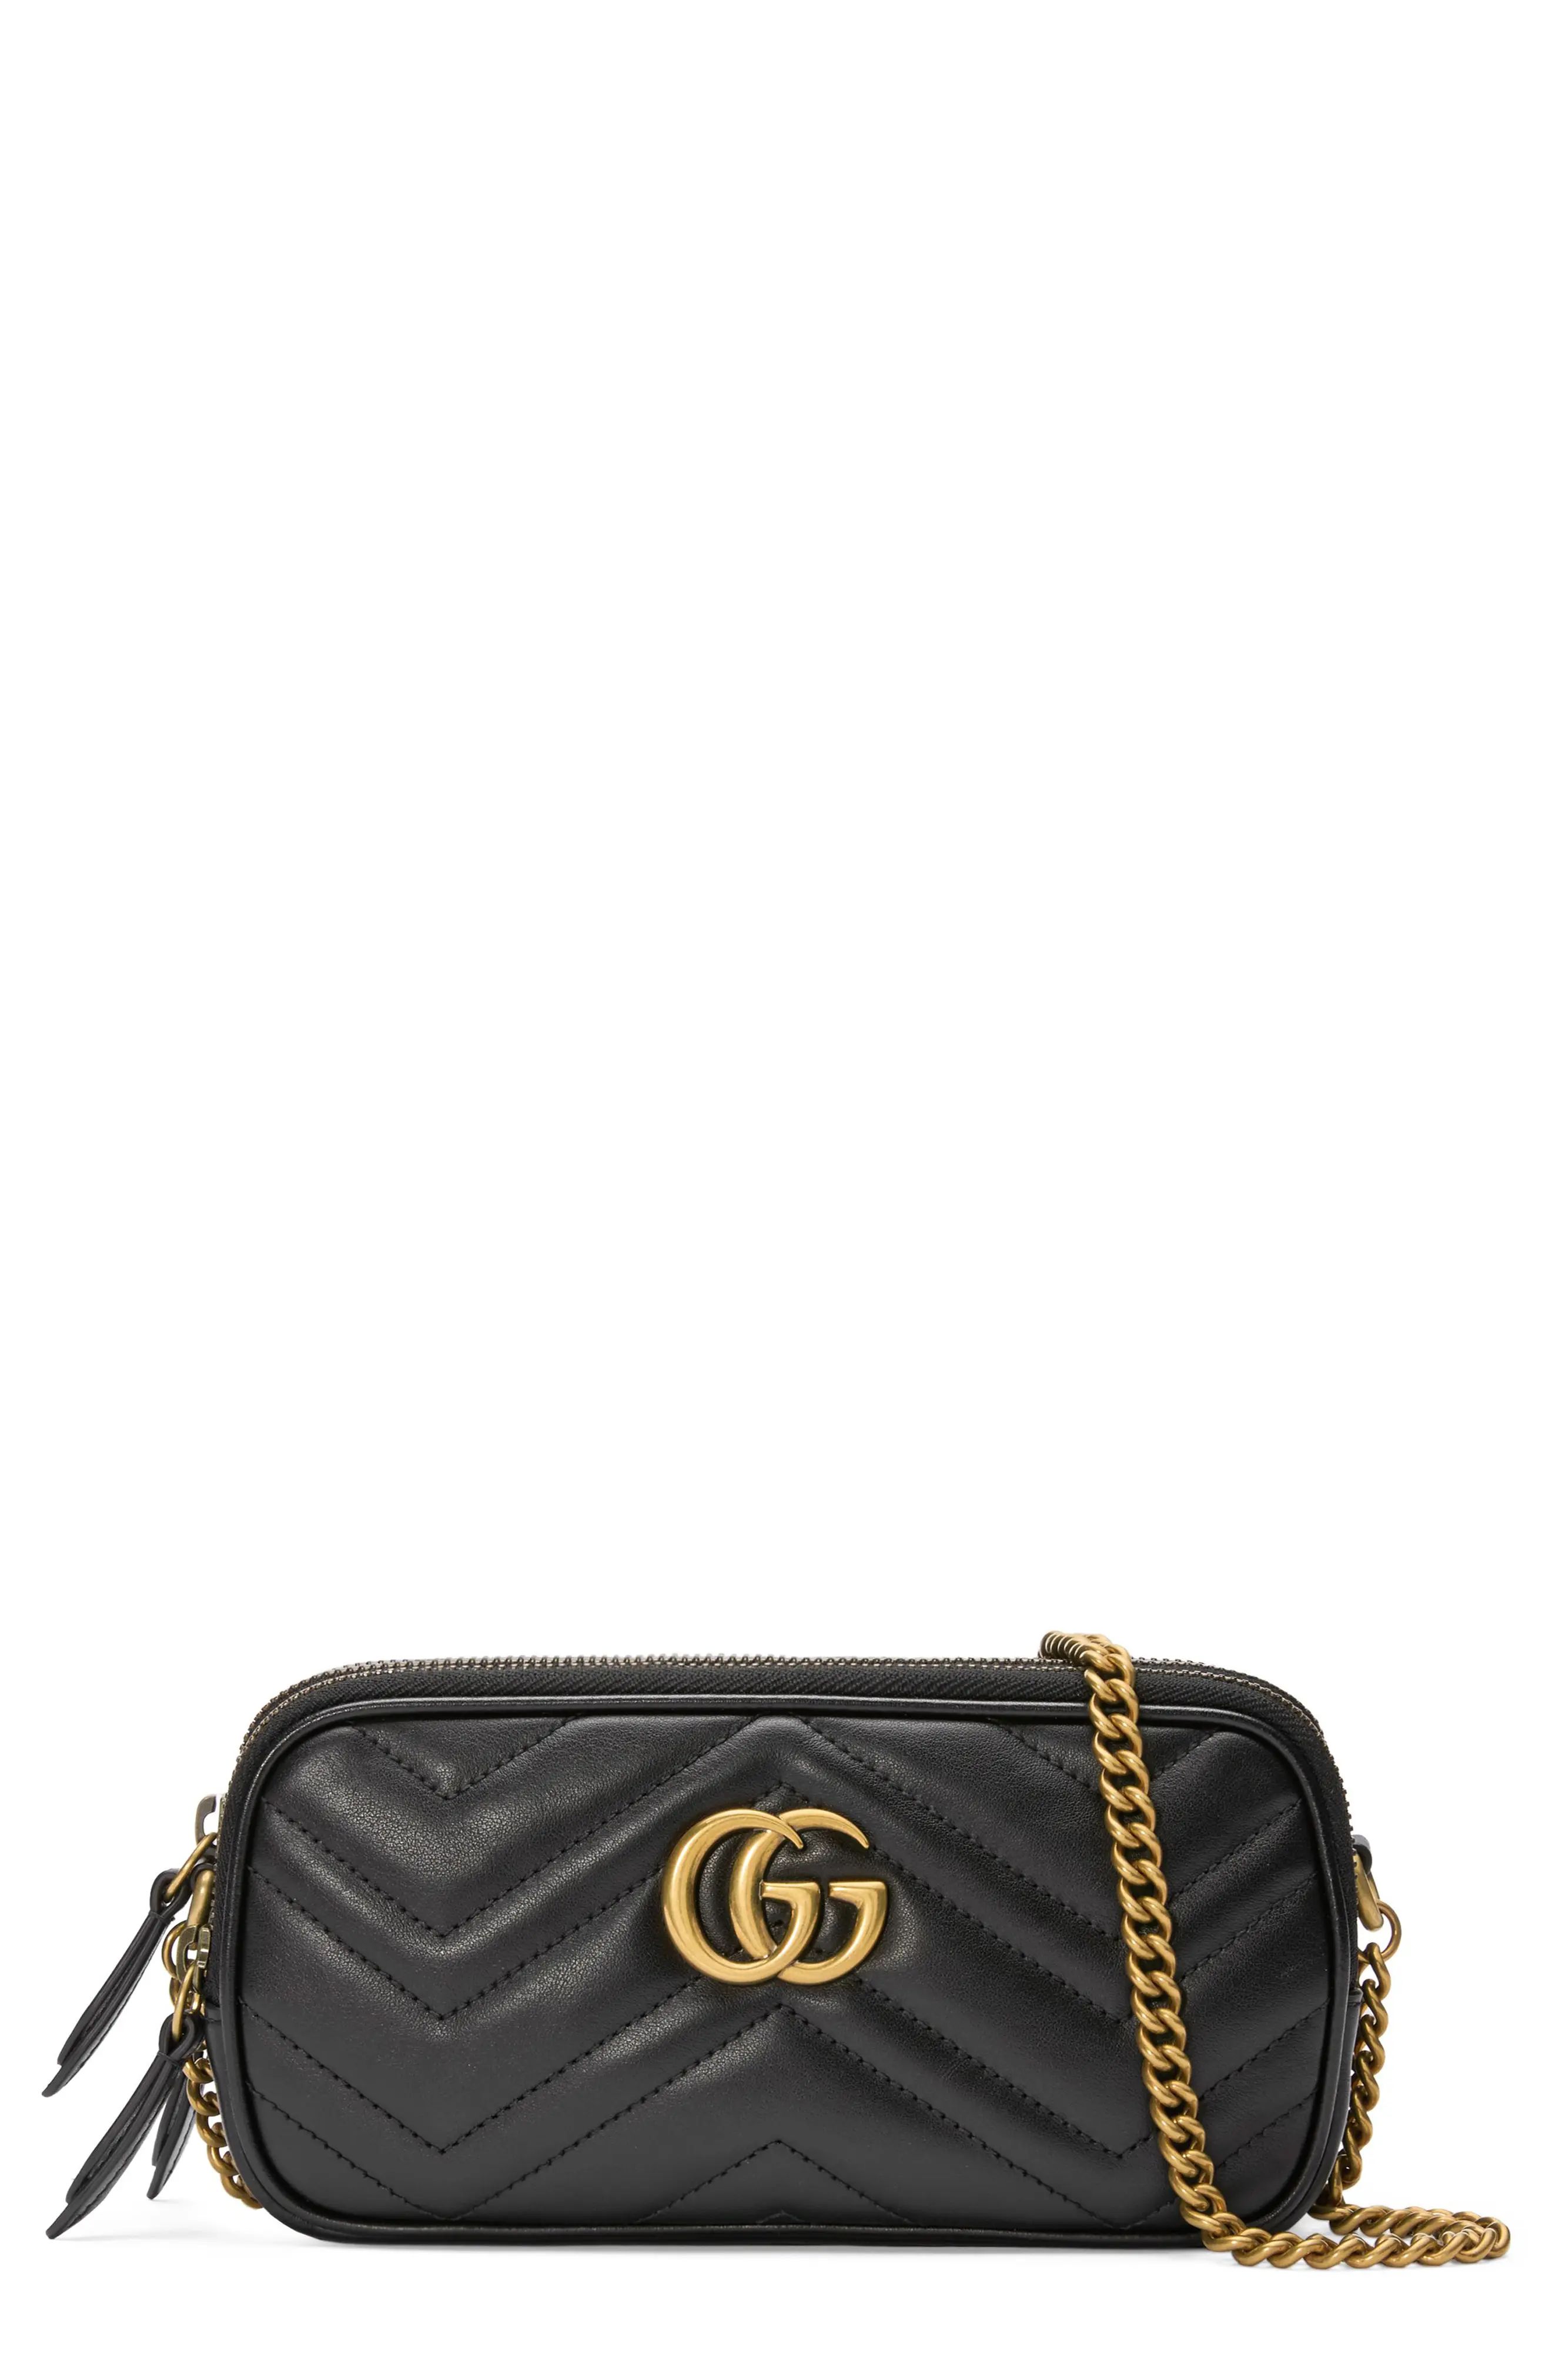 Gucci Marmont 2.0 Leather Crossbody Bag - Black | Nordstrom